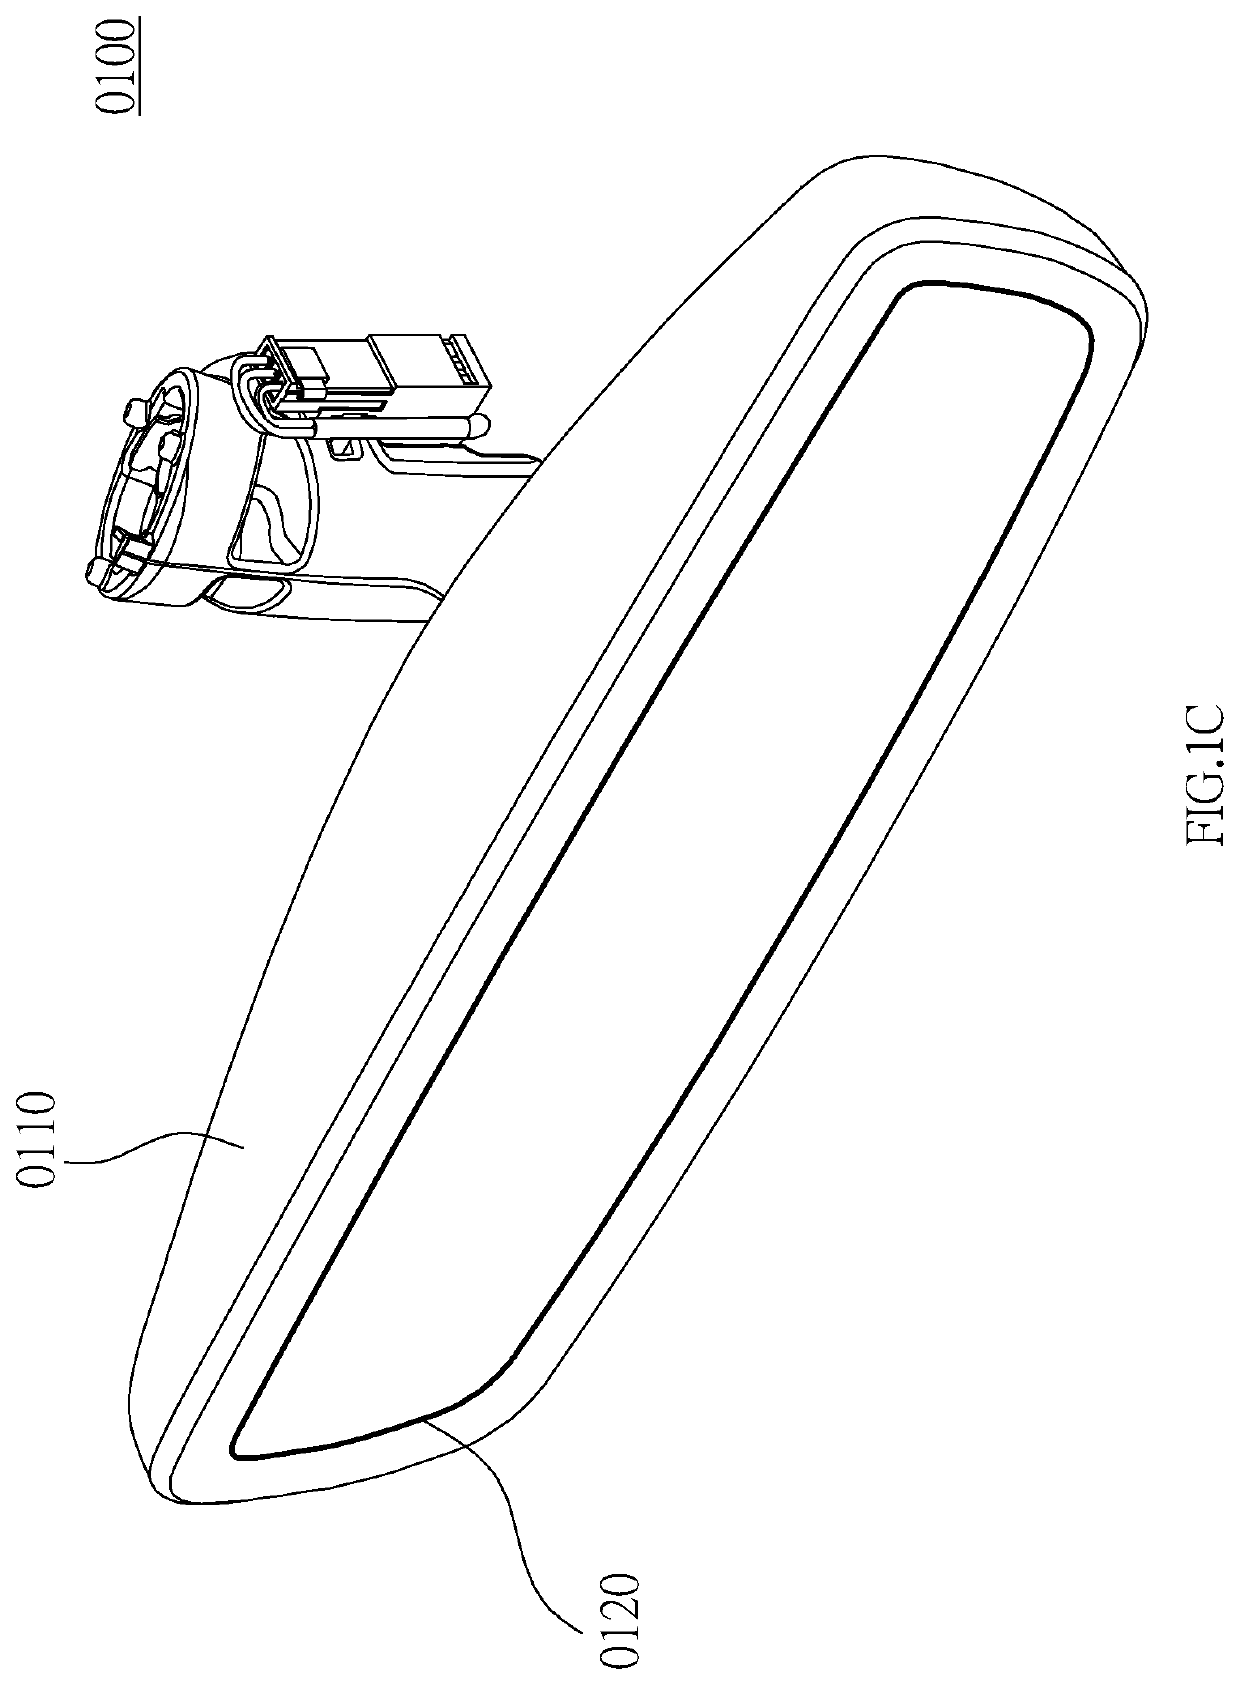 Movable carrier auxiliary system and vehicle electronic rear-view mirror